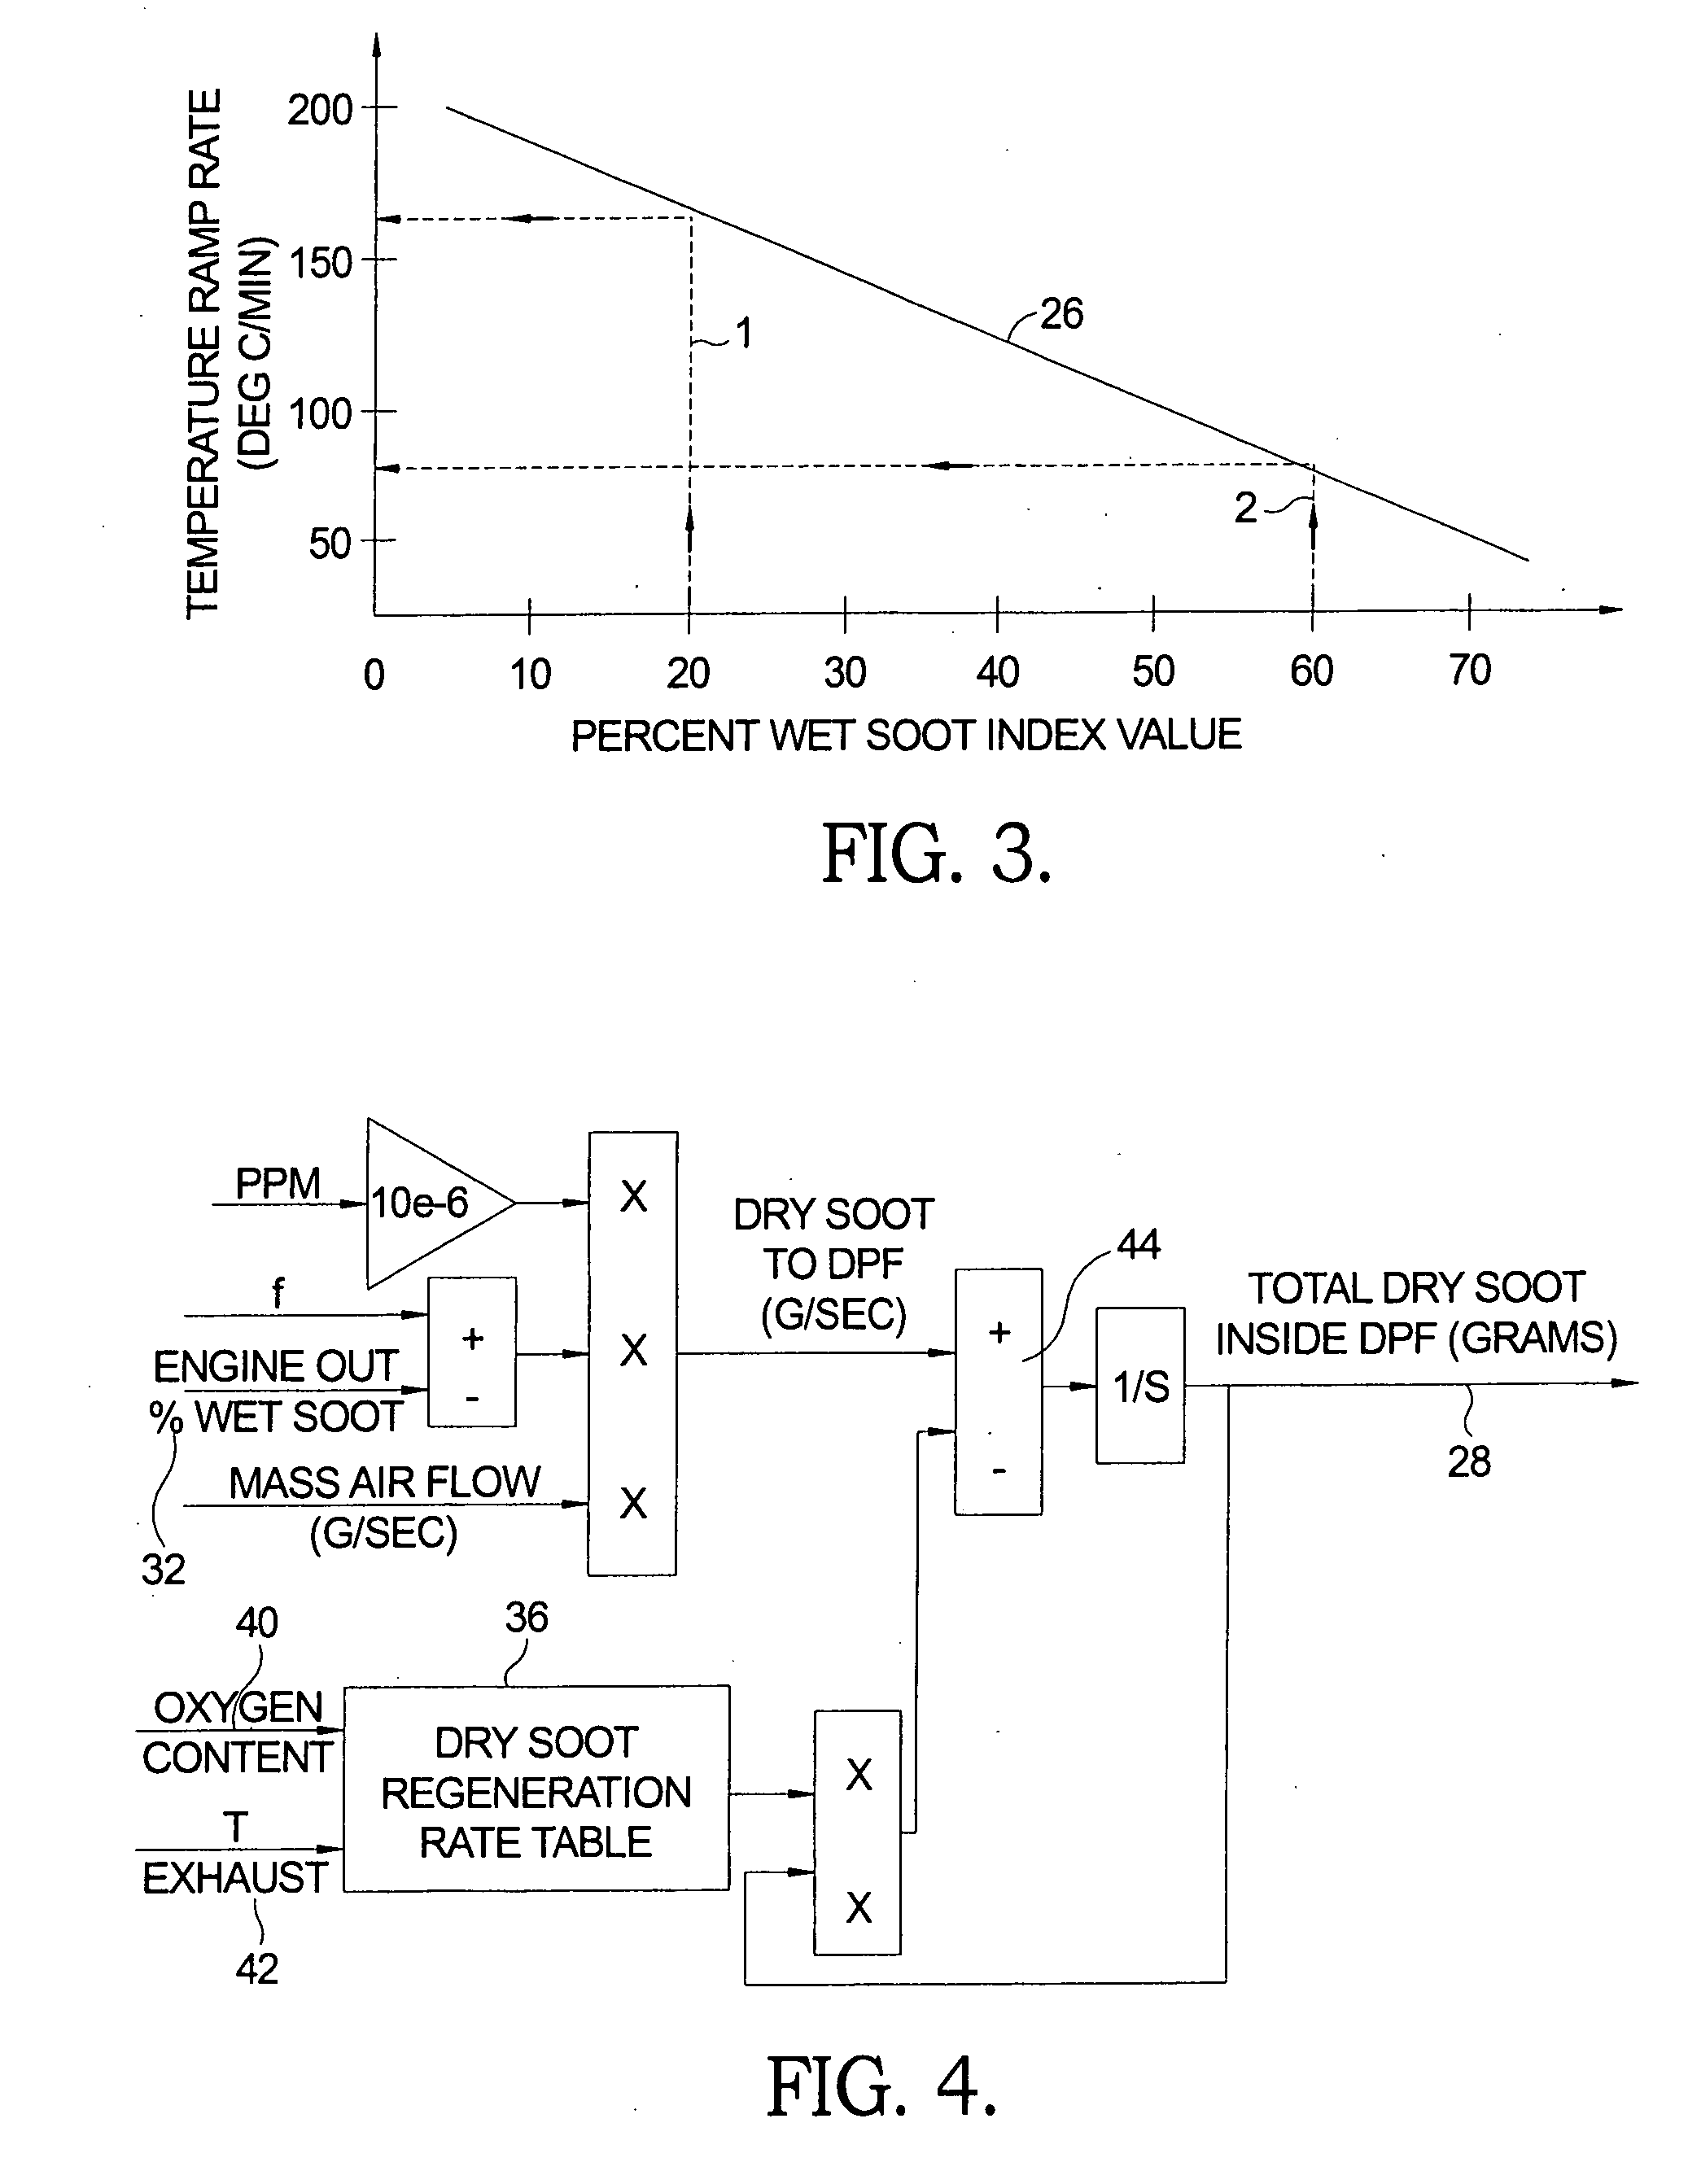 Method for controlling catalyst and filter temperatures in regeneration of a catalytic diesel particulate filter